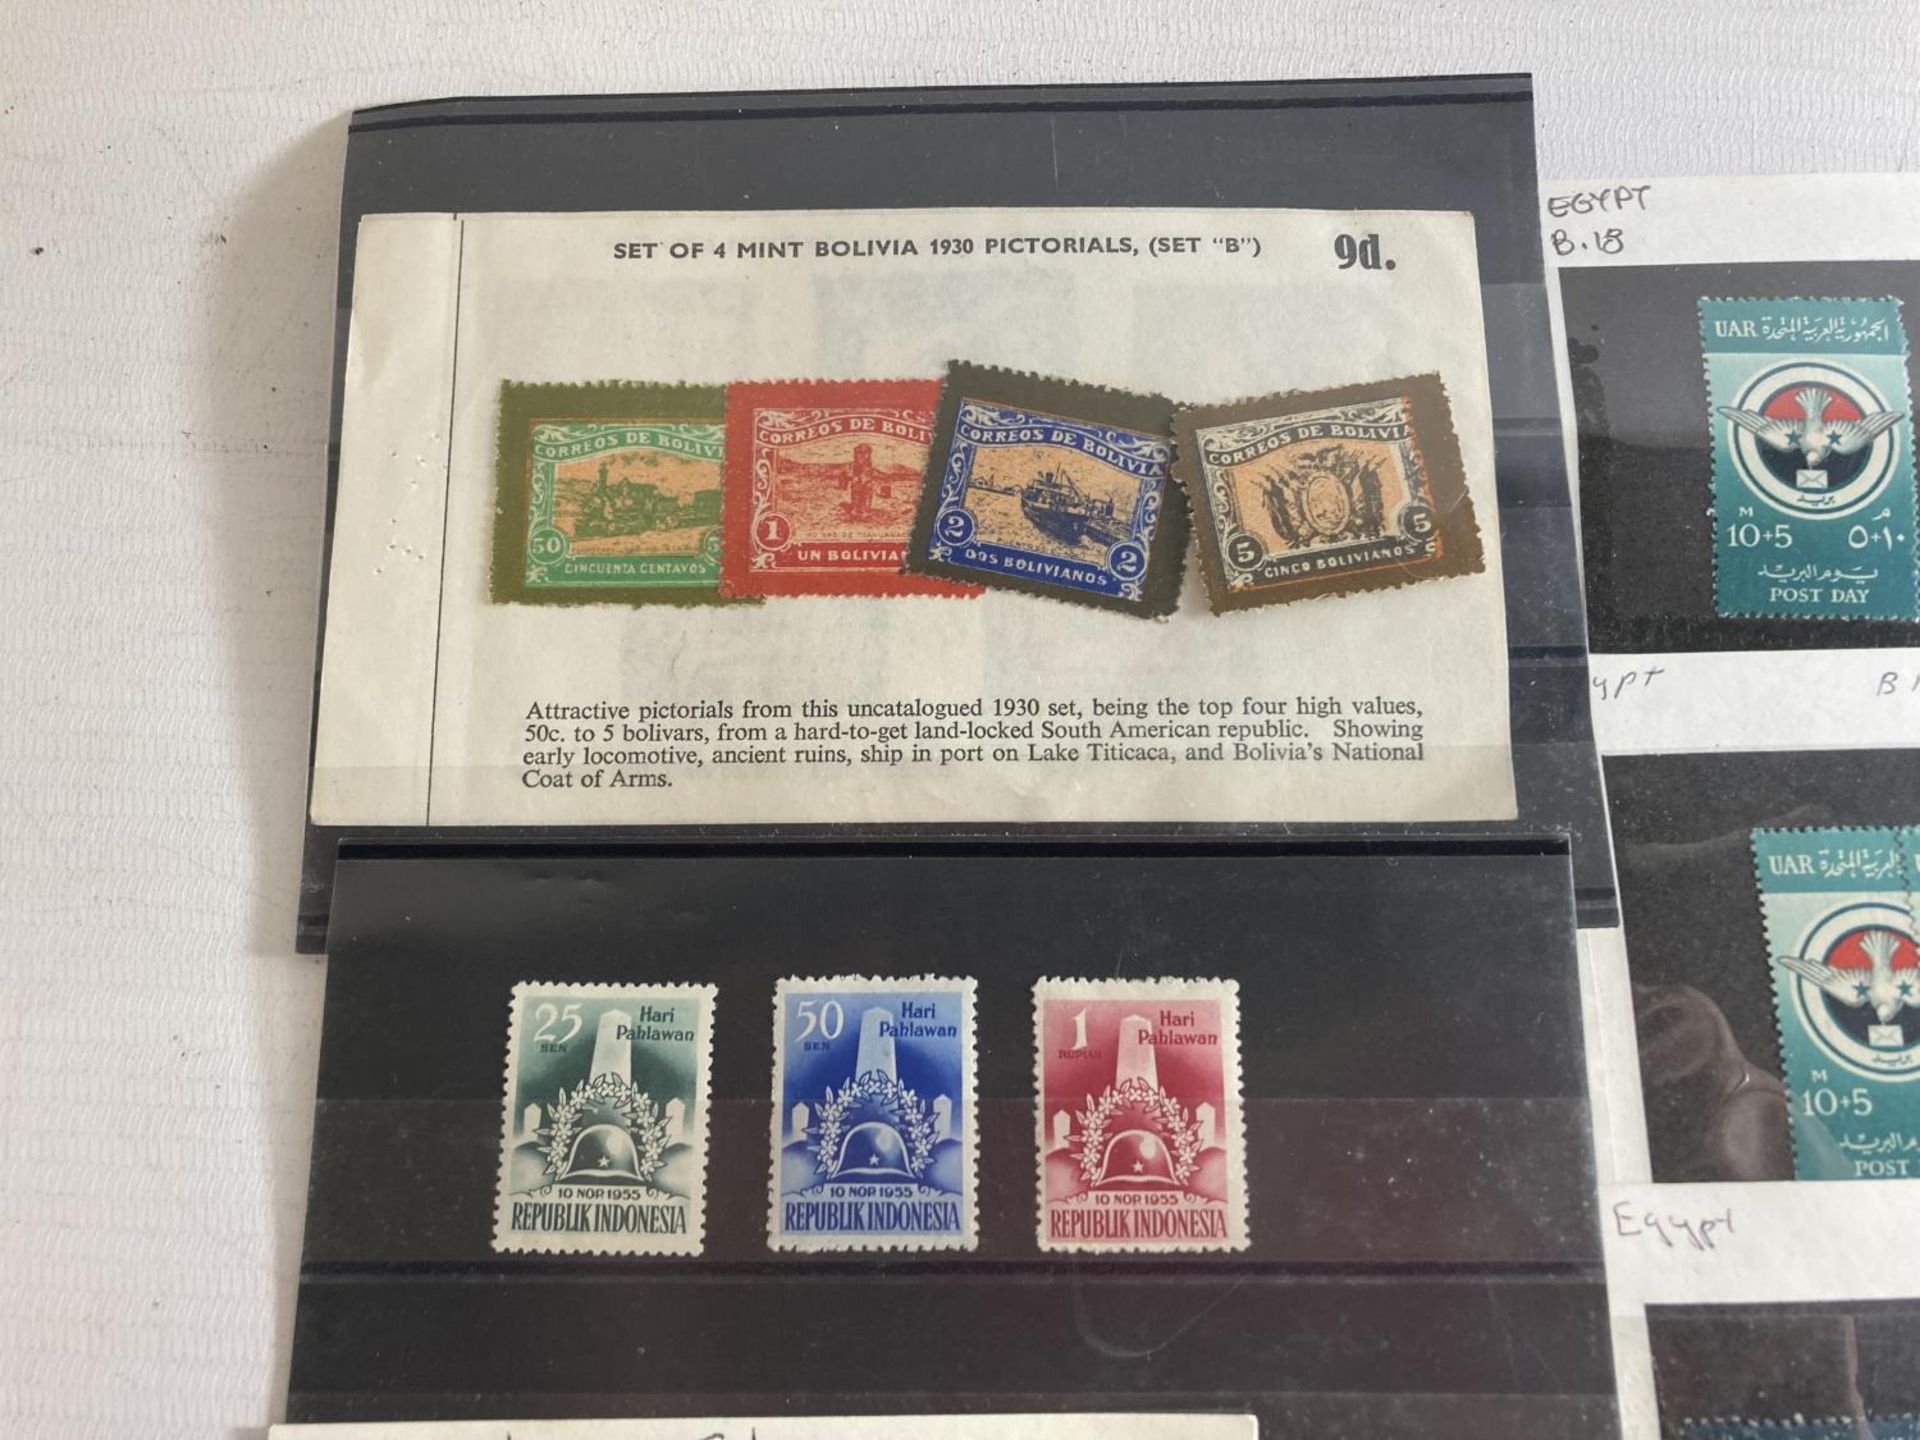 A MIXED LOT OF STAMPS TO INCLUDE EGYPT, POLAND INDONESIA, AFGHANISTAN, RUSSIA, MAURITANIA ETC MANY - Image 2 of 7